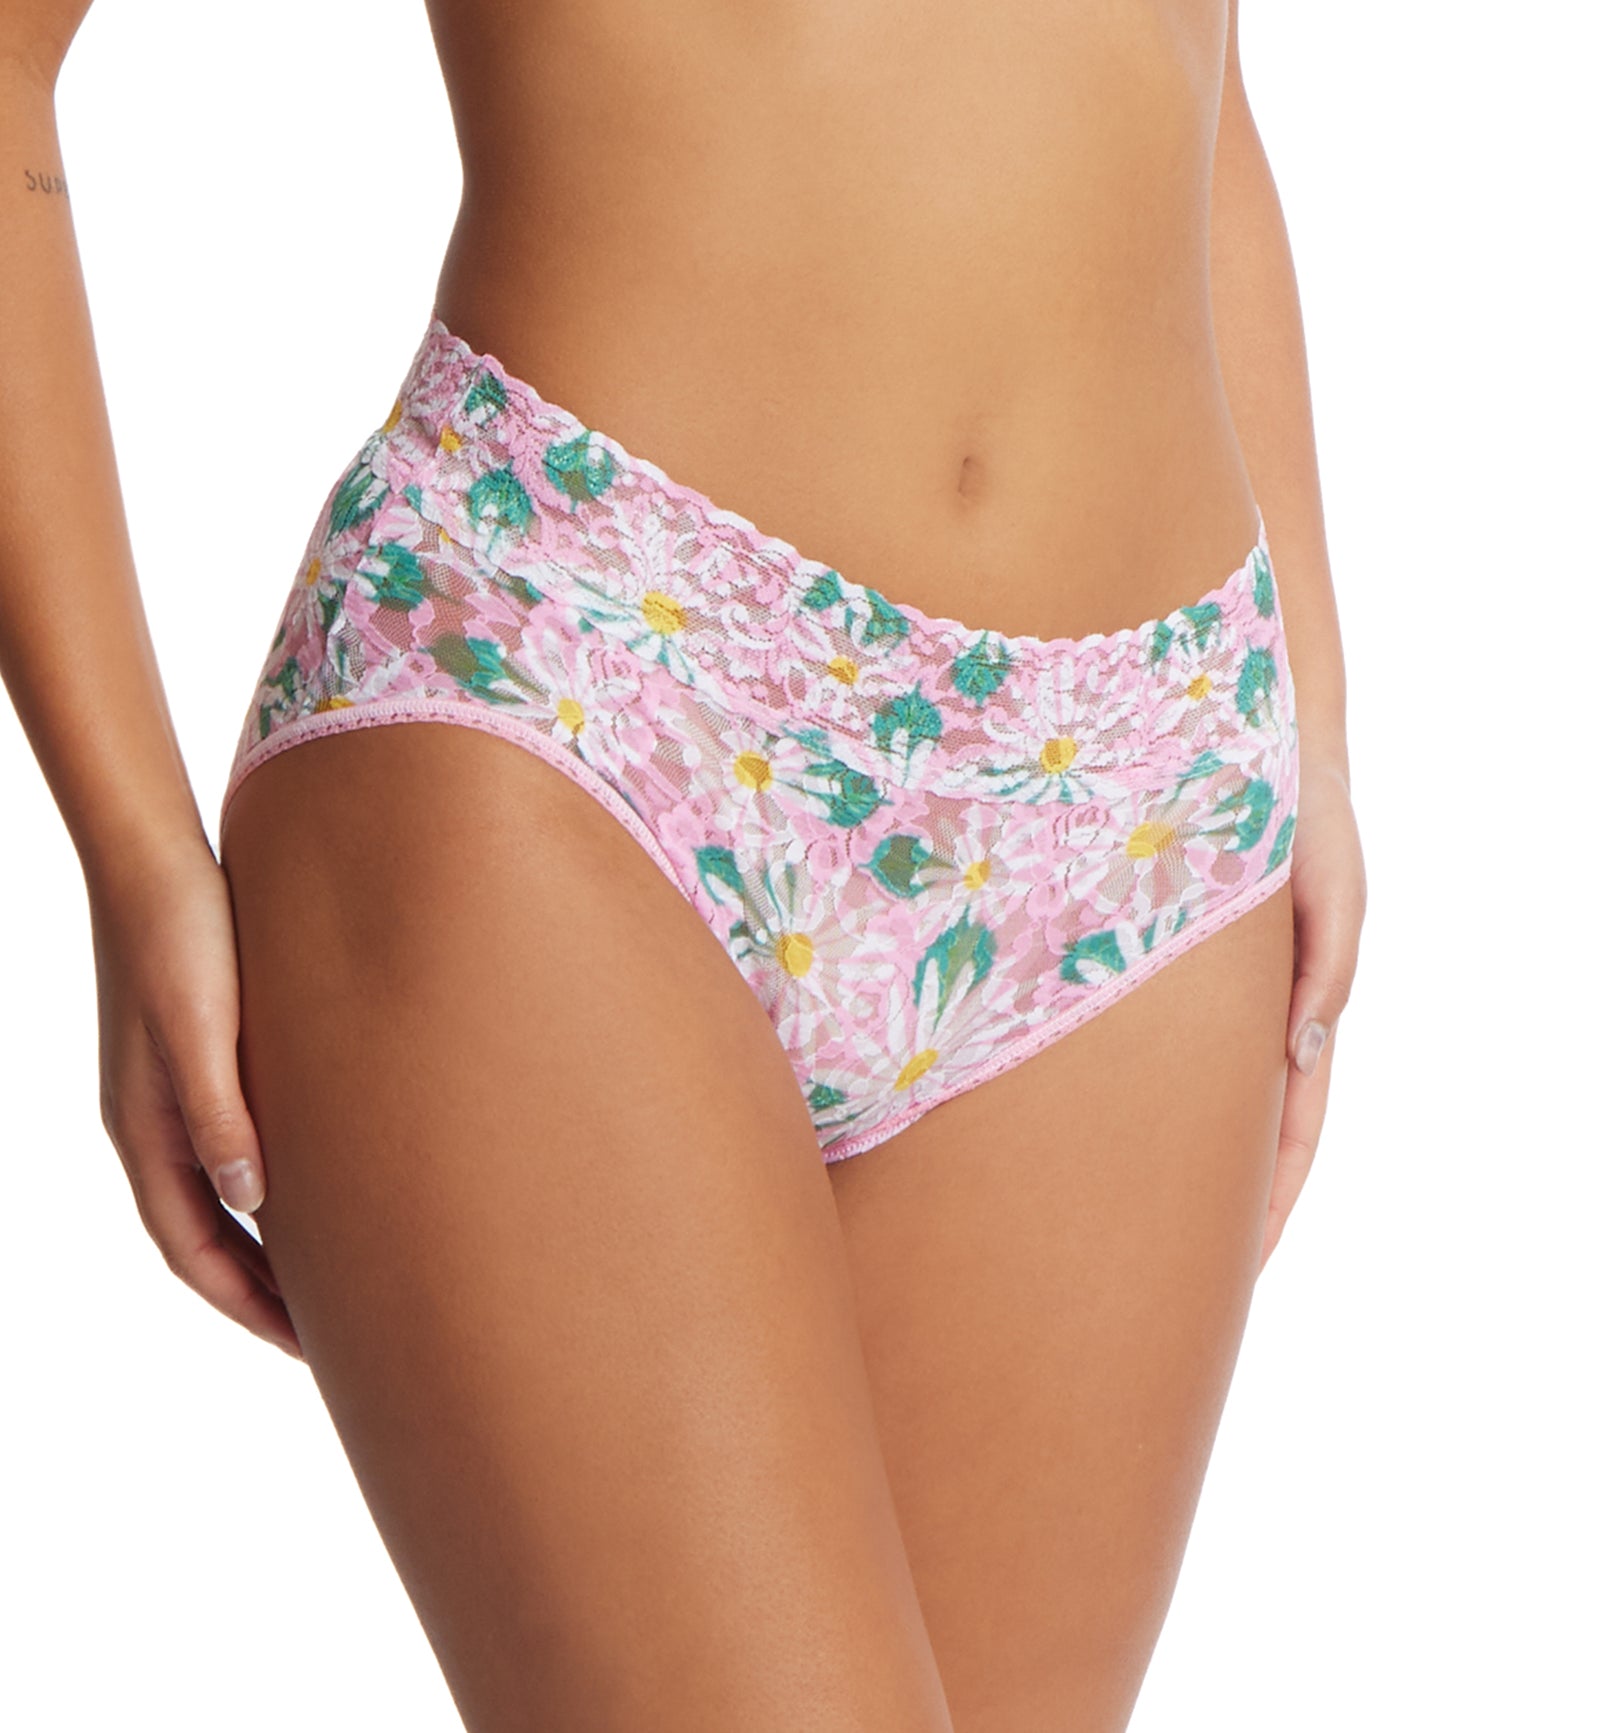 Hanky Panky Signature Lace Printed French Brief (PR461),Small,Hello Spring - Hello Spring,S